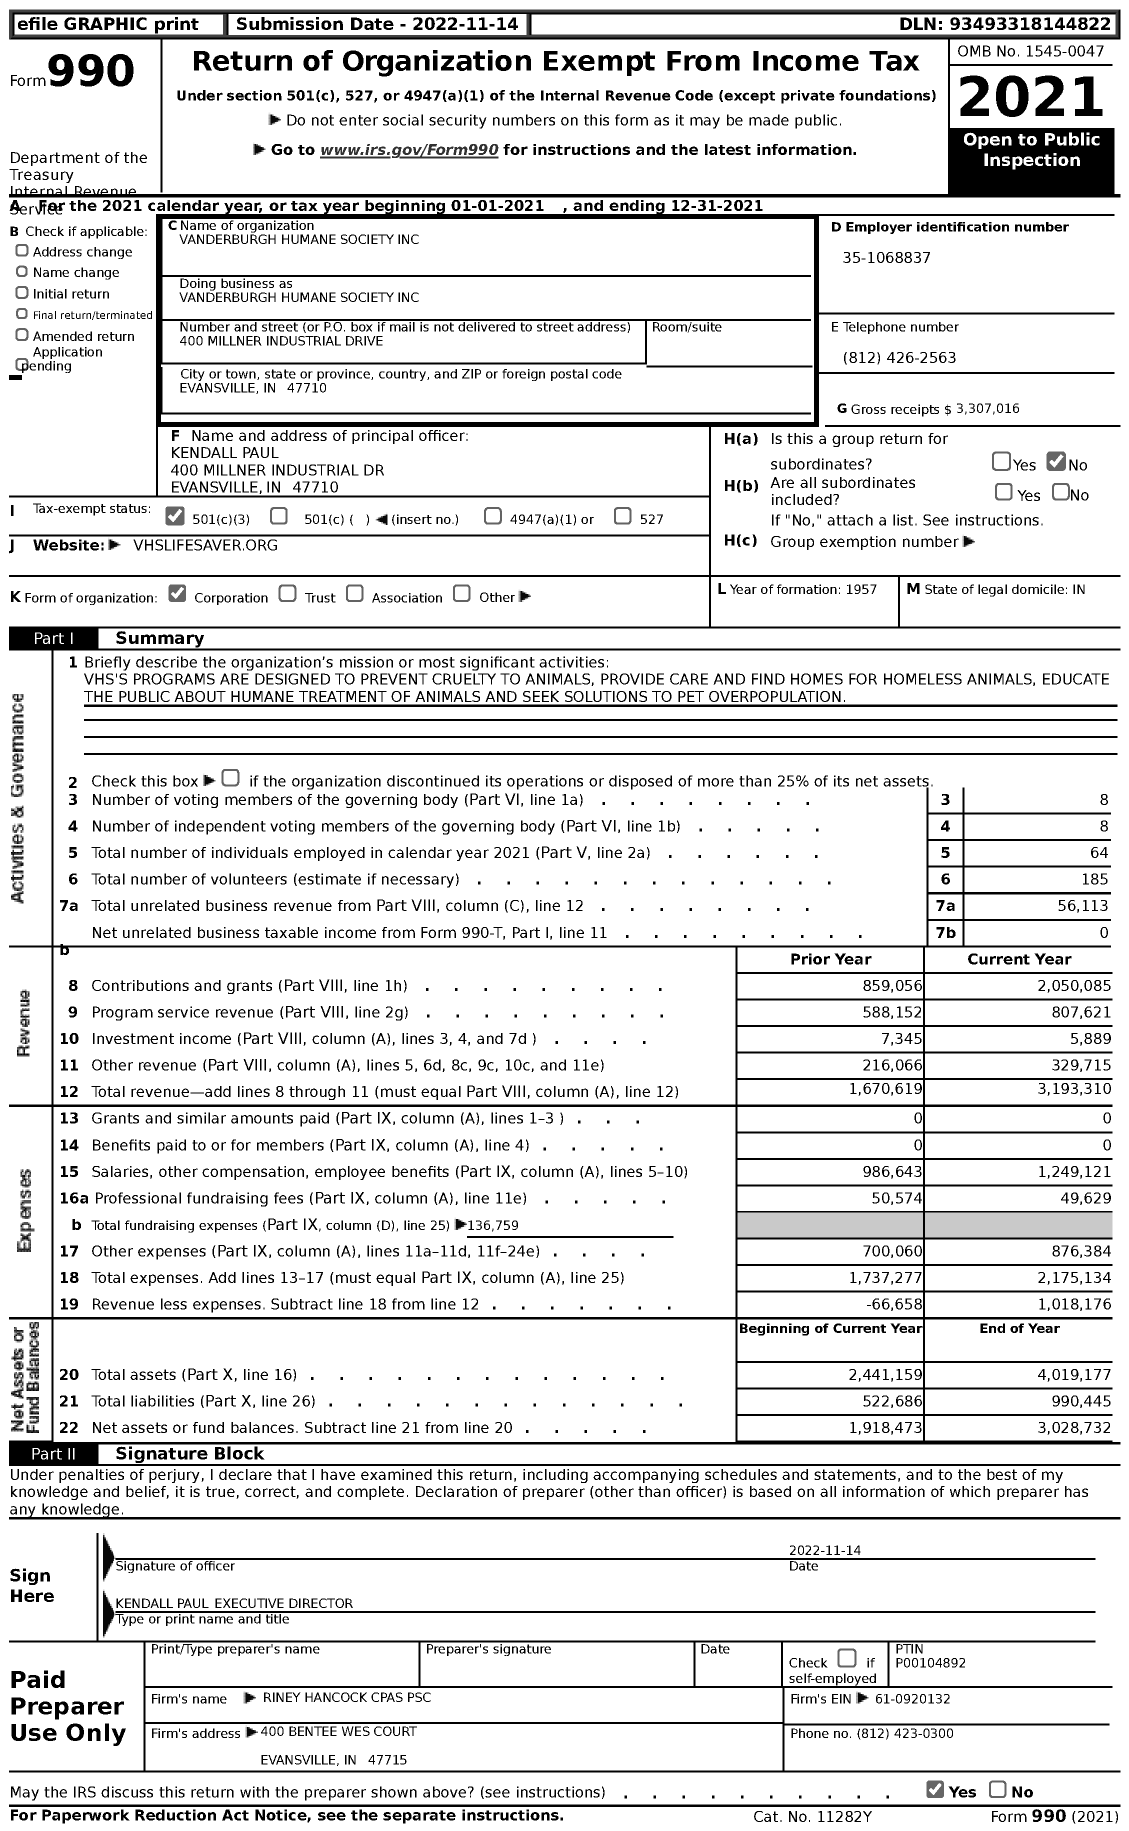 Image of first page of 2021 Form 990 for Vanderburgh Humane Society (VHS)